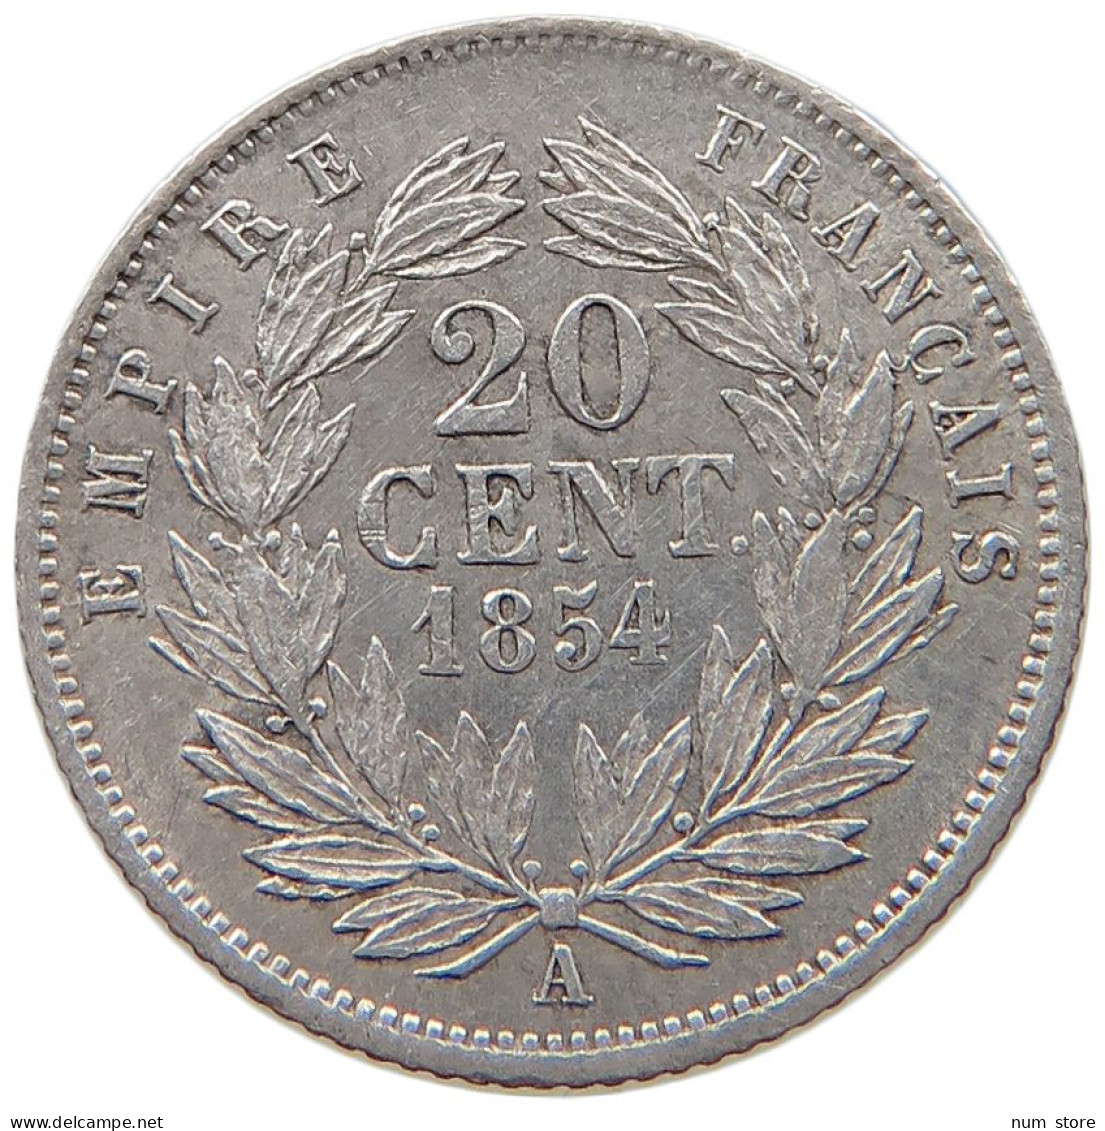 FRANCE 20 CENTIMES 1854 A Napoleon III. (1852-1870) #t030 0605 - 20 Centimes